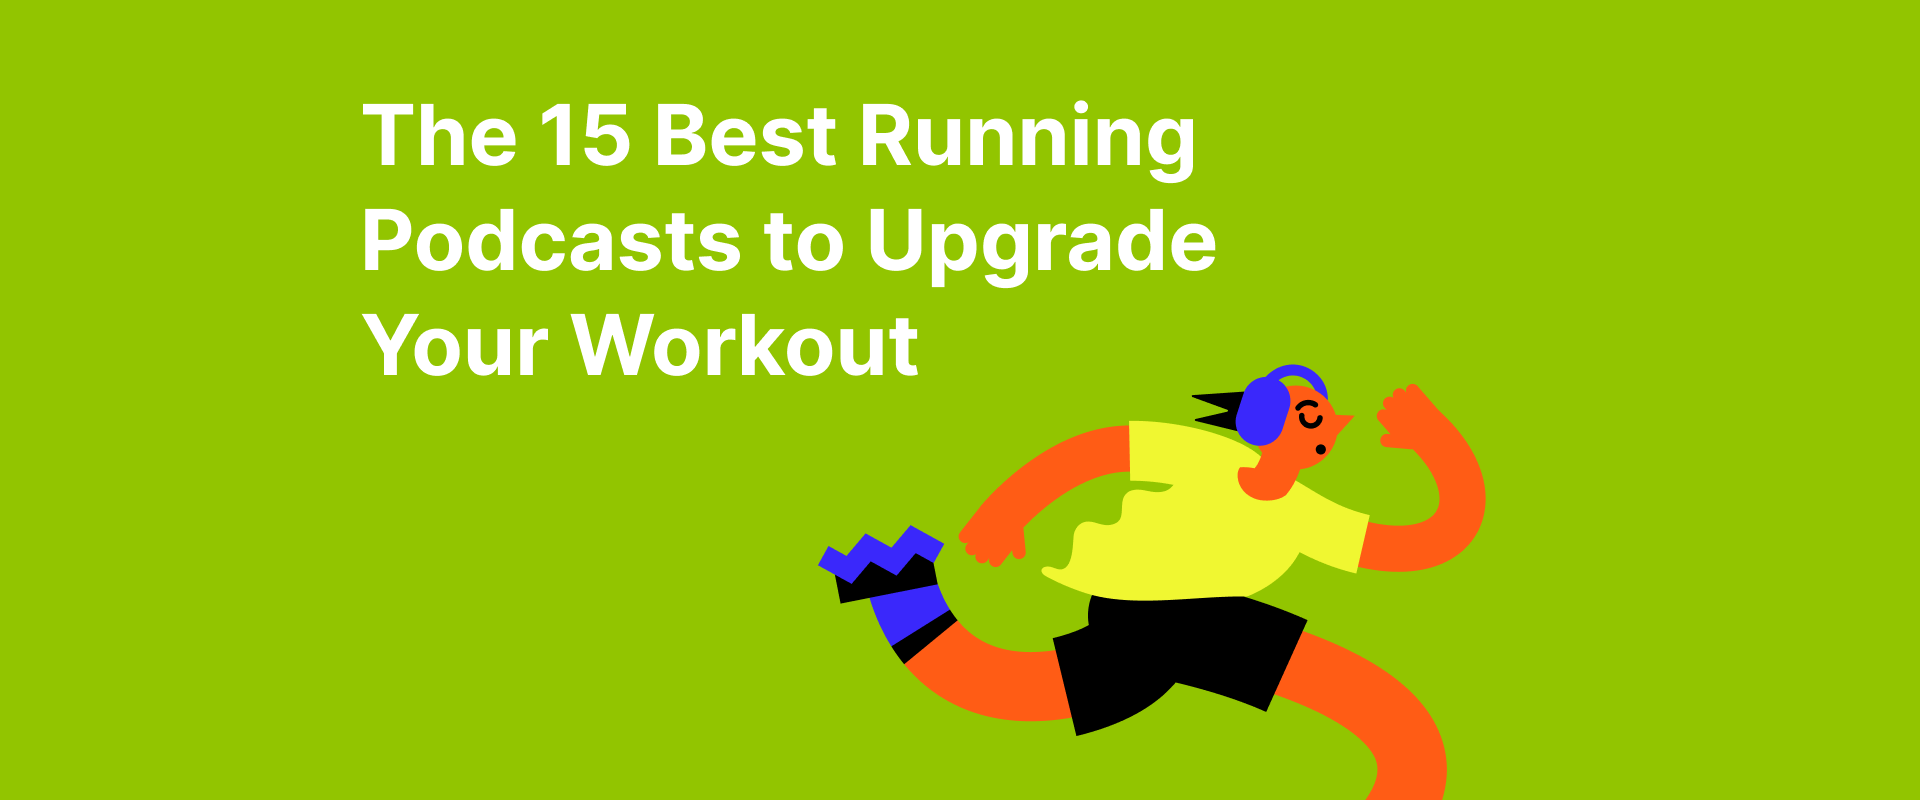 15 Best Running Podcasts